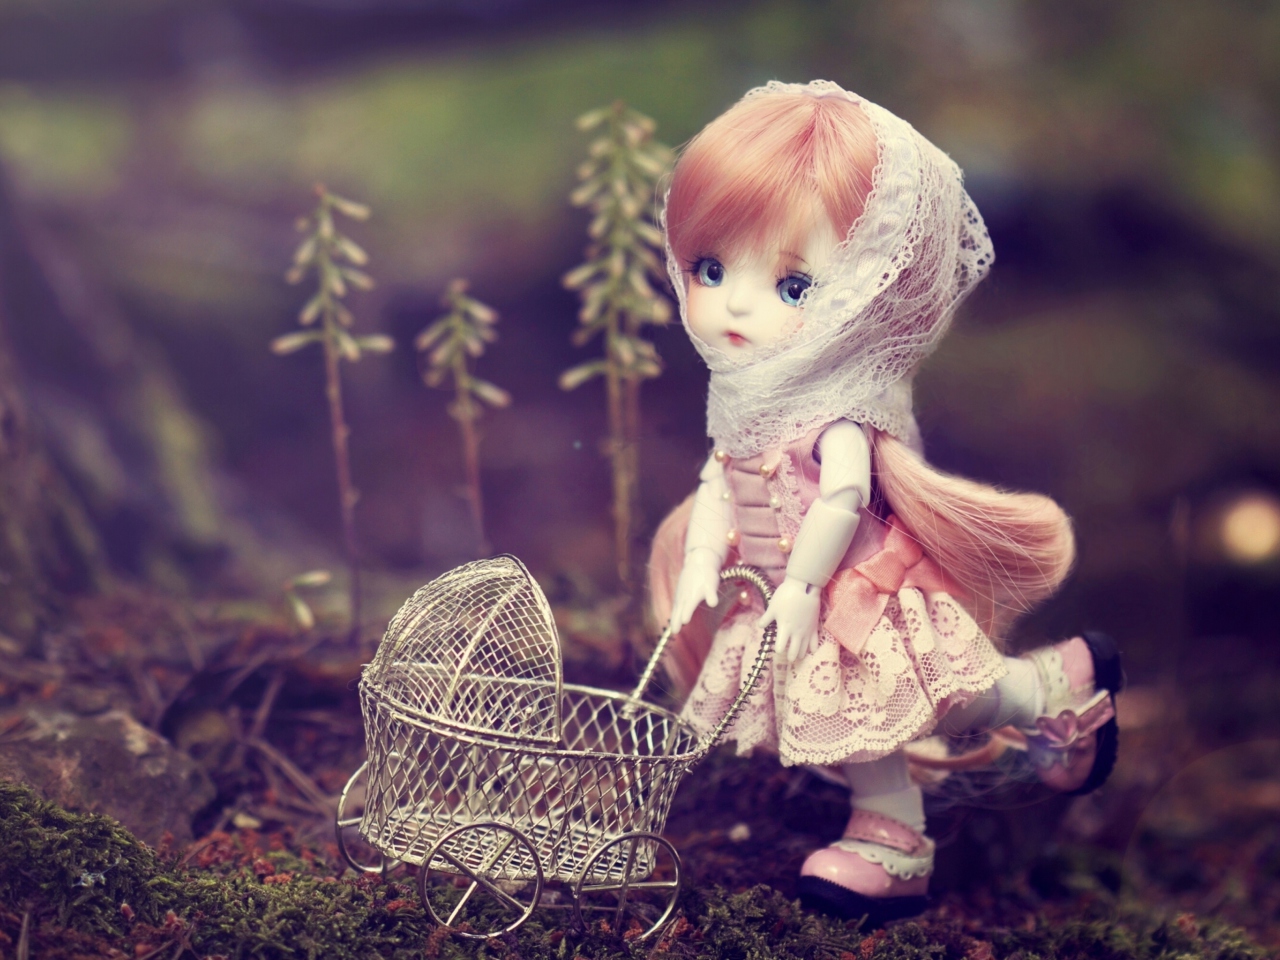 Das Doll With Baby Carriage Wallpaper 1280x960